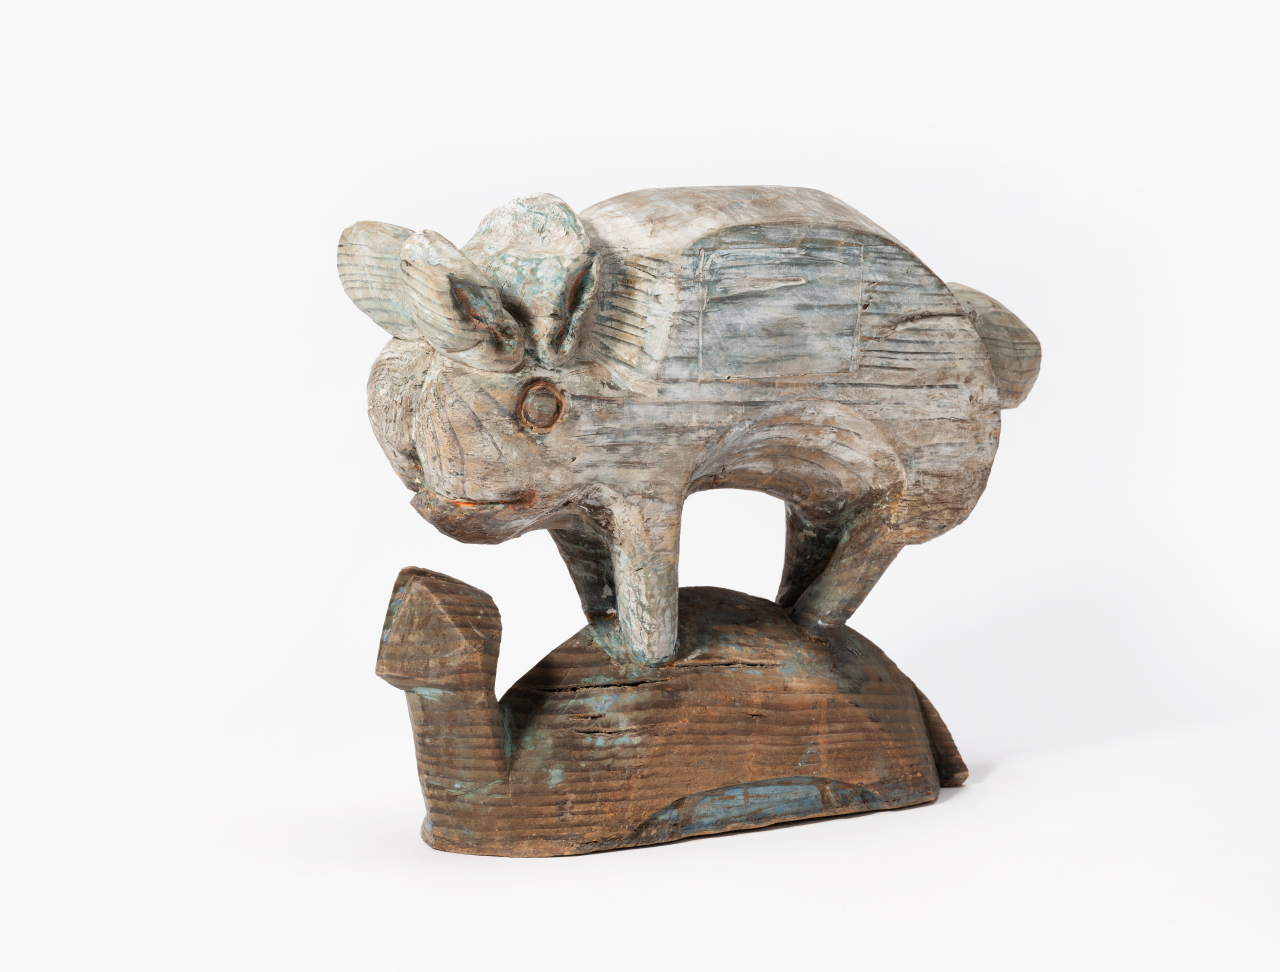 A wooden carving of a rabbit standing on the back of a terrapin, made after 1945 (NFMK)